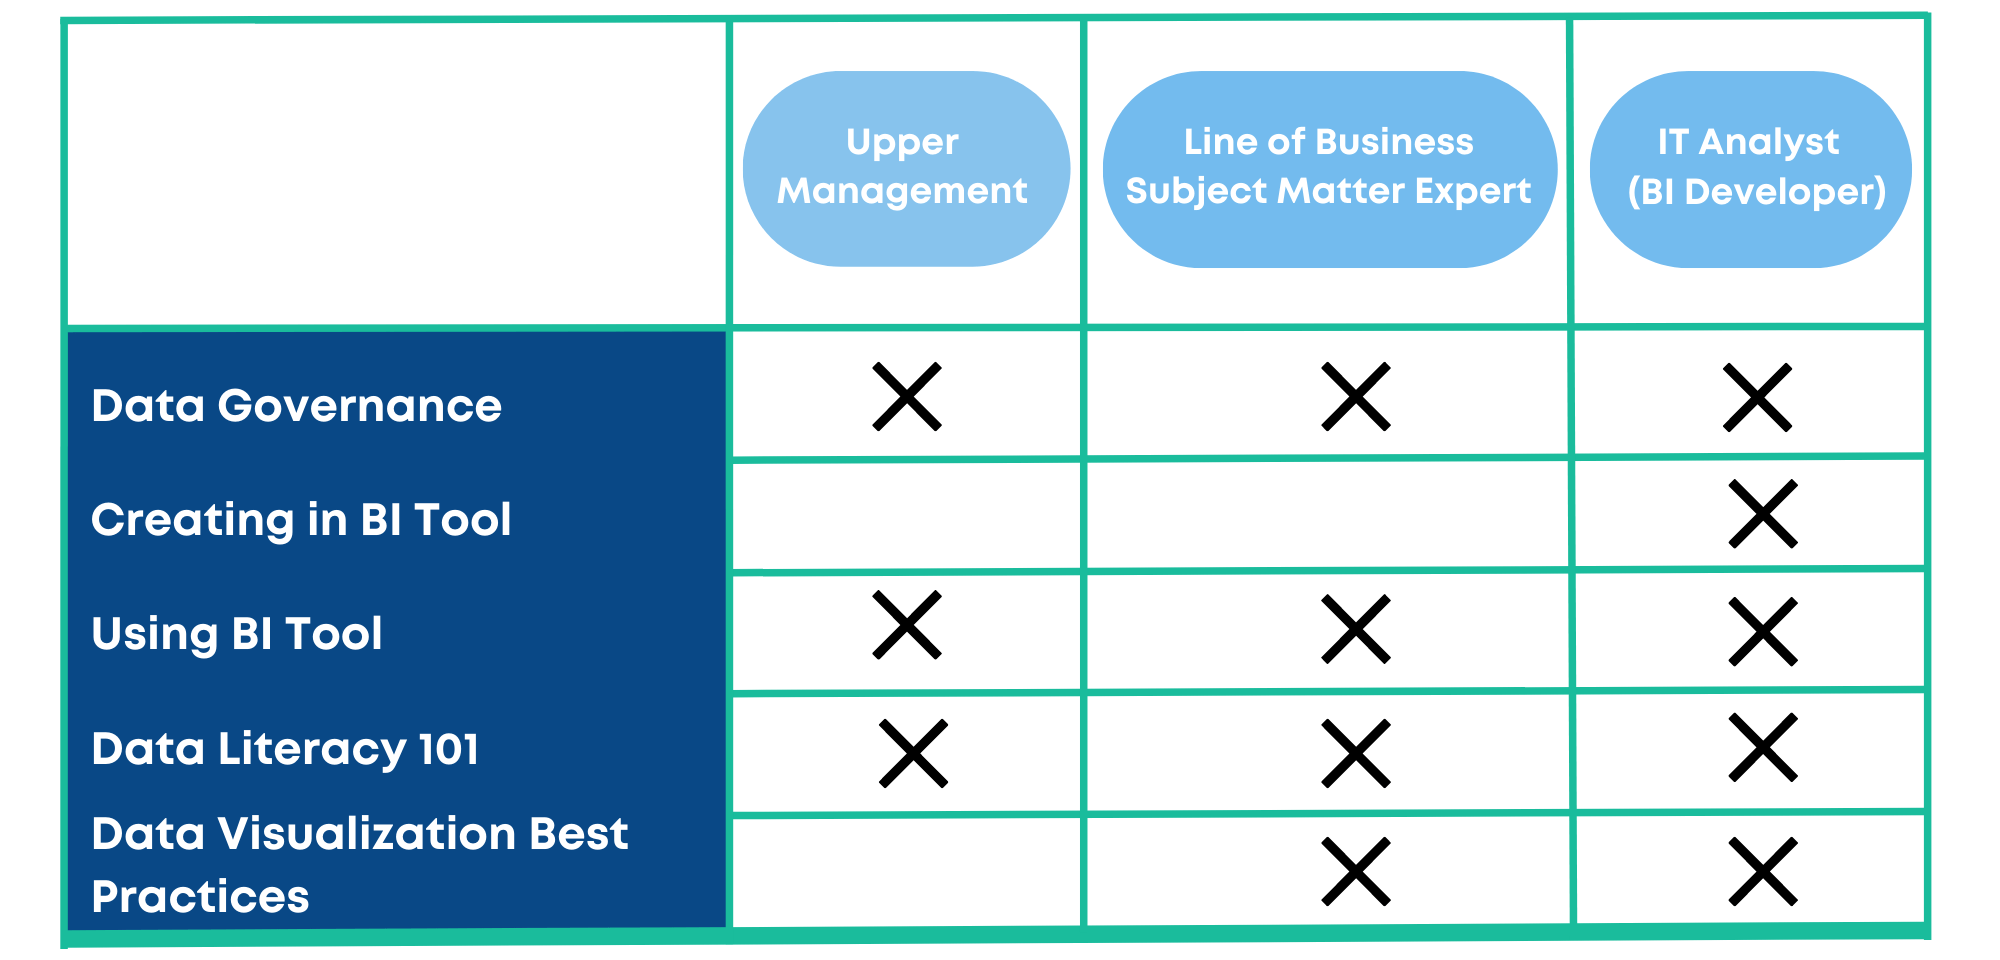 4x6 light pastel green box representing skills gaps in your data analytics team. First row states: Upper Management, Line of Business Subject Matter Expert, IT Analyst. Rows 2-6 are marked with X symbols aligned to different data and analytics practices/responsibilities on the left.